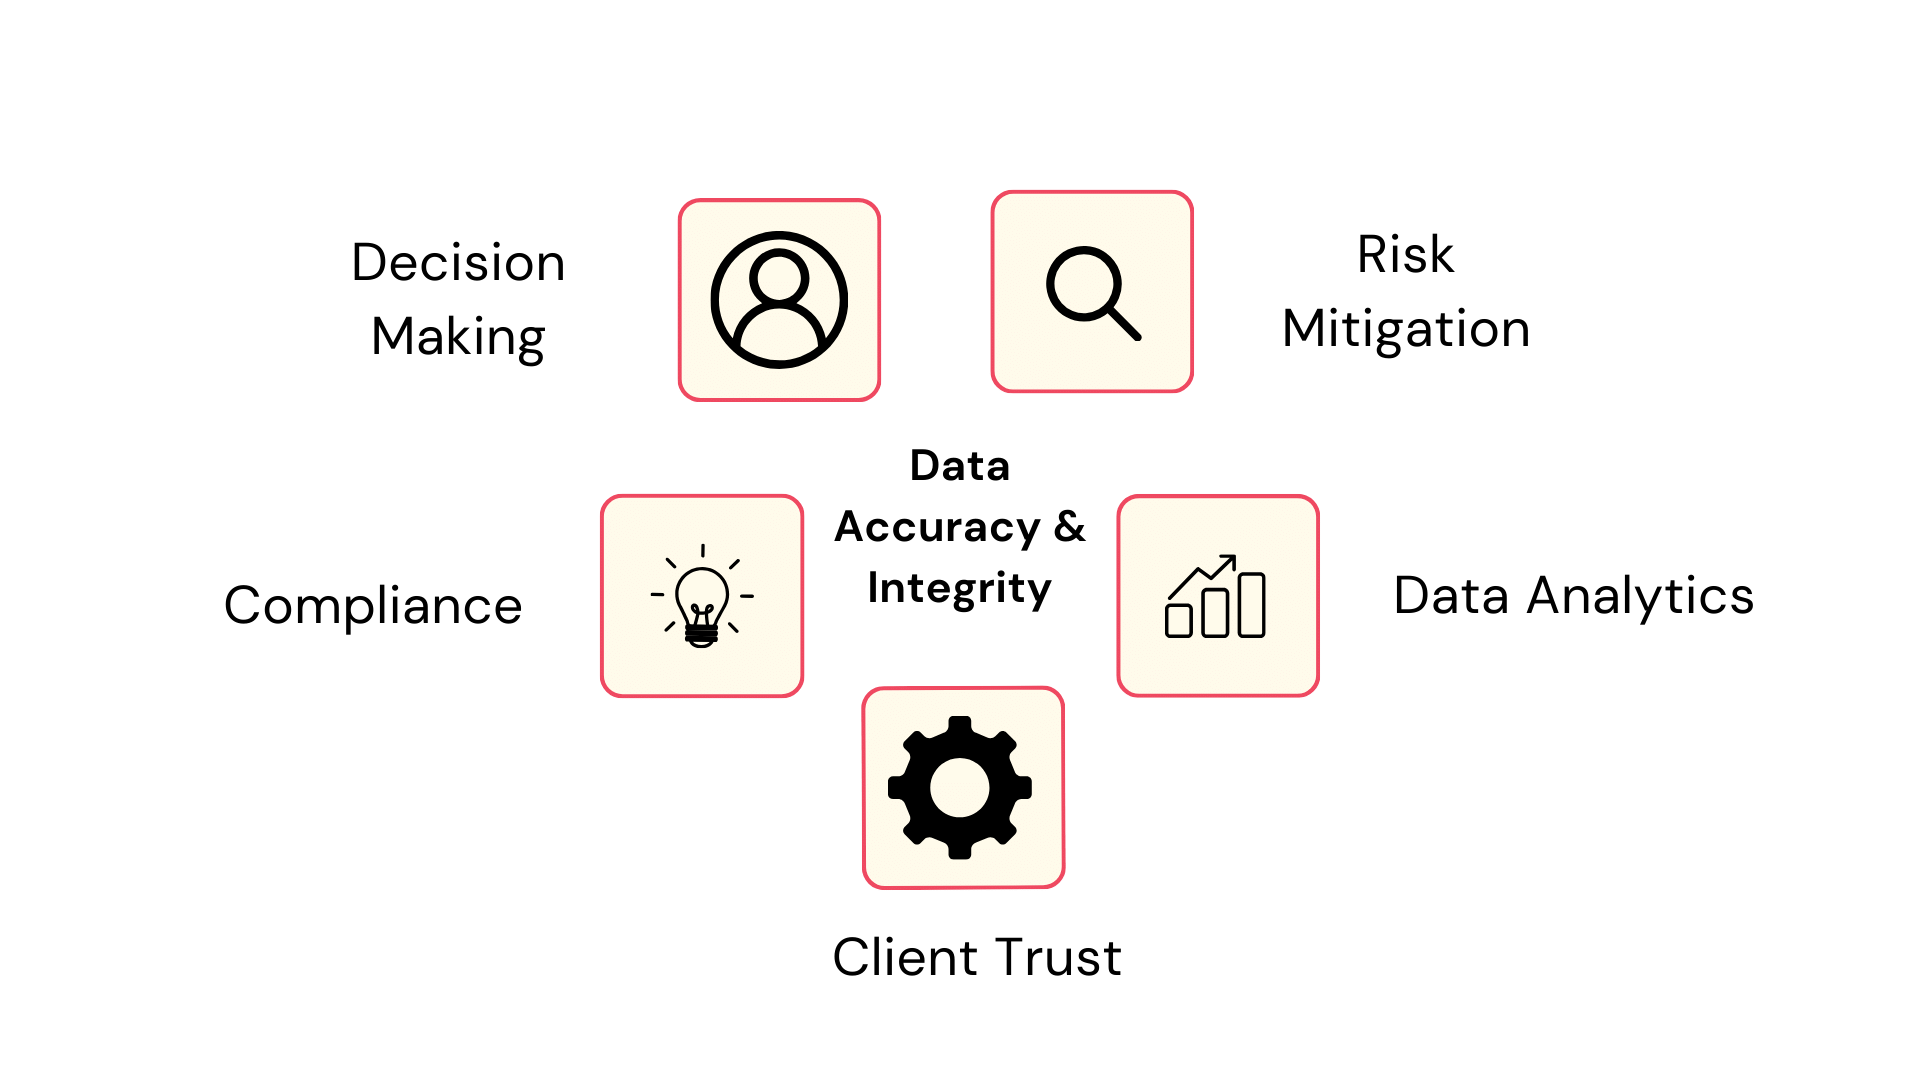 Data accuracy and integrity